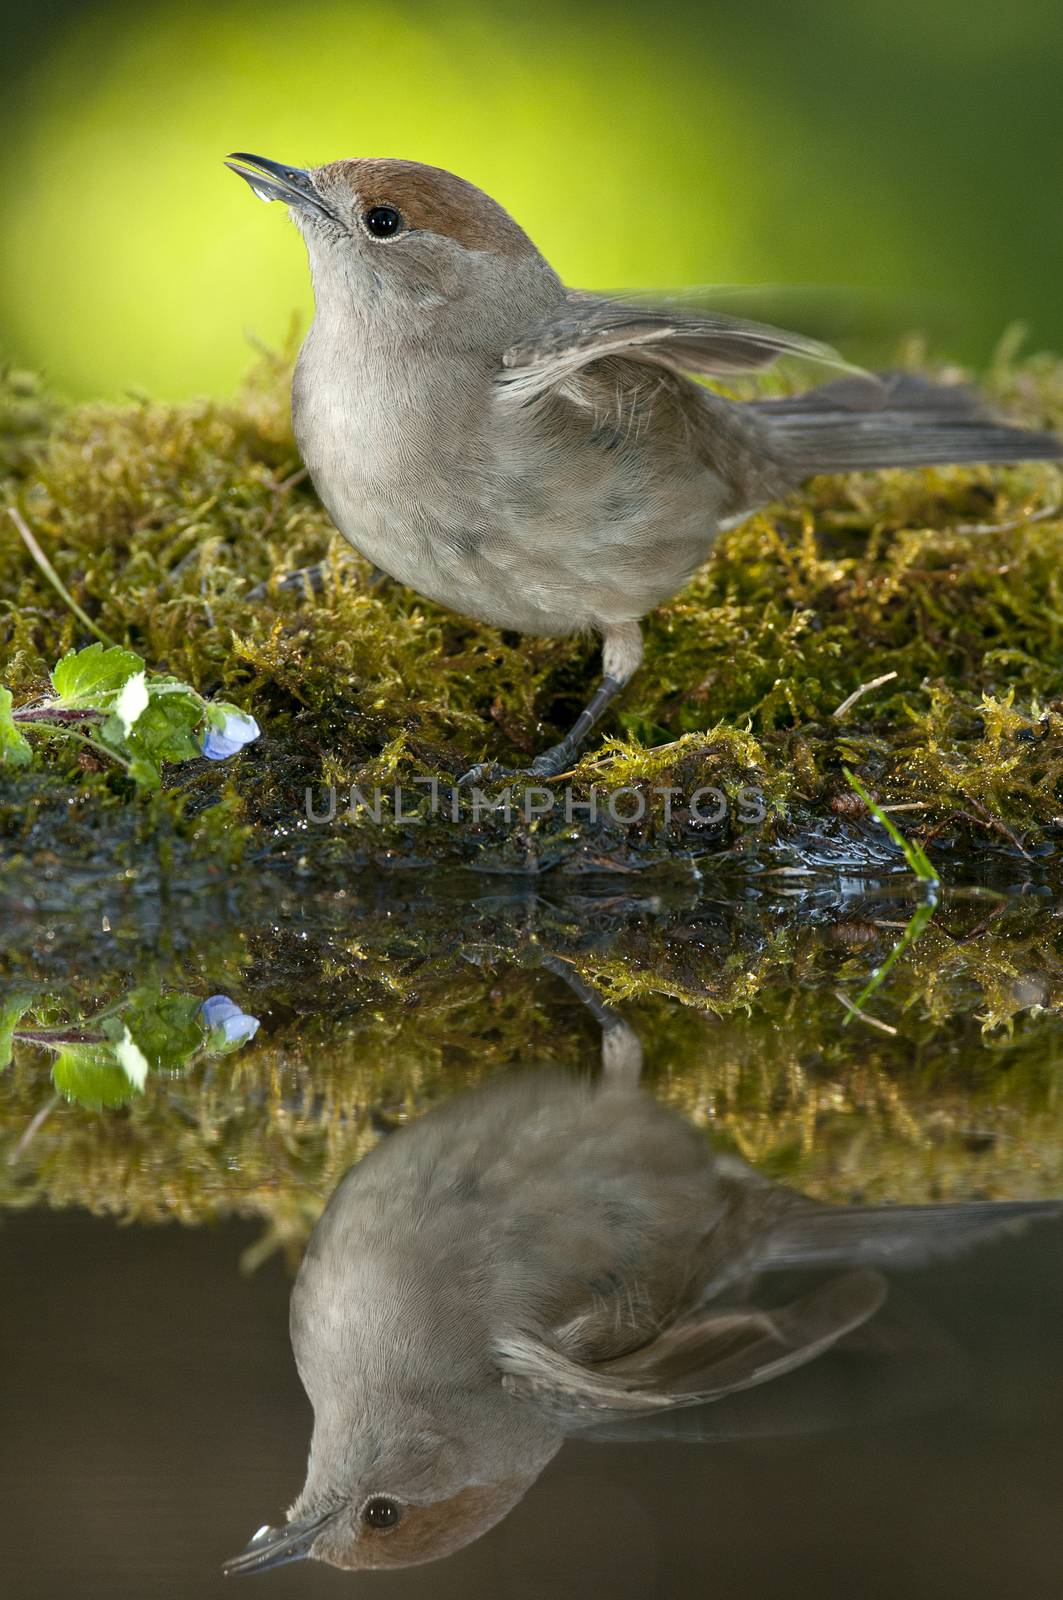 Blackcap (Sylvia atricapilla), in a drinking fountain, drinking water with its reflection